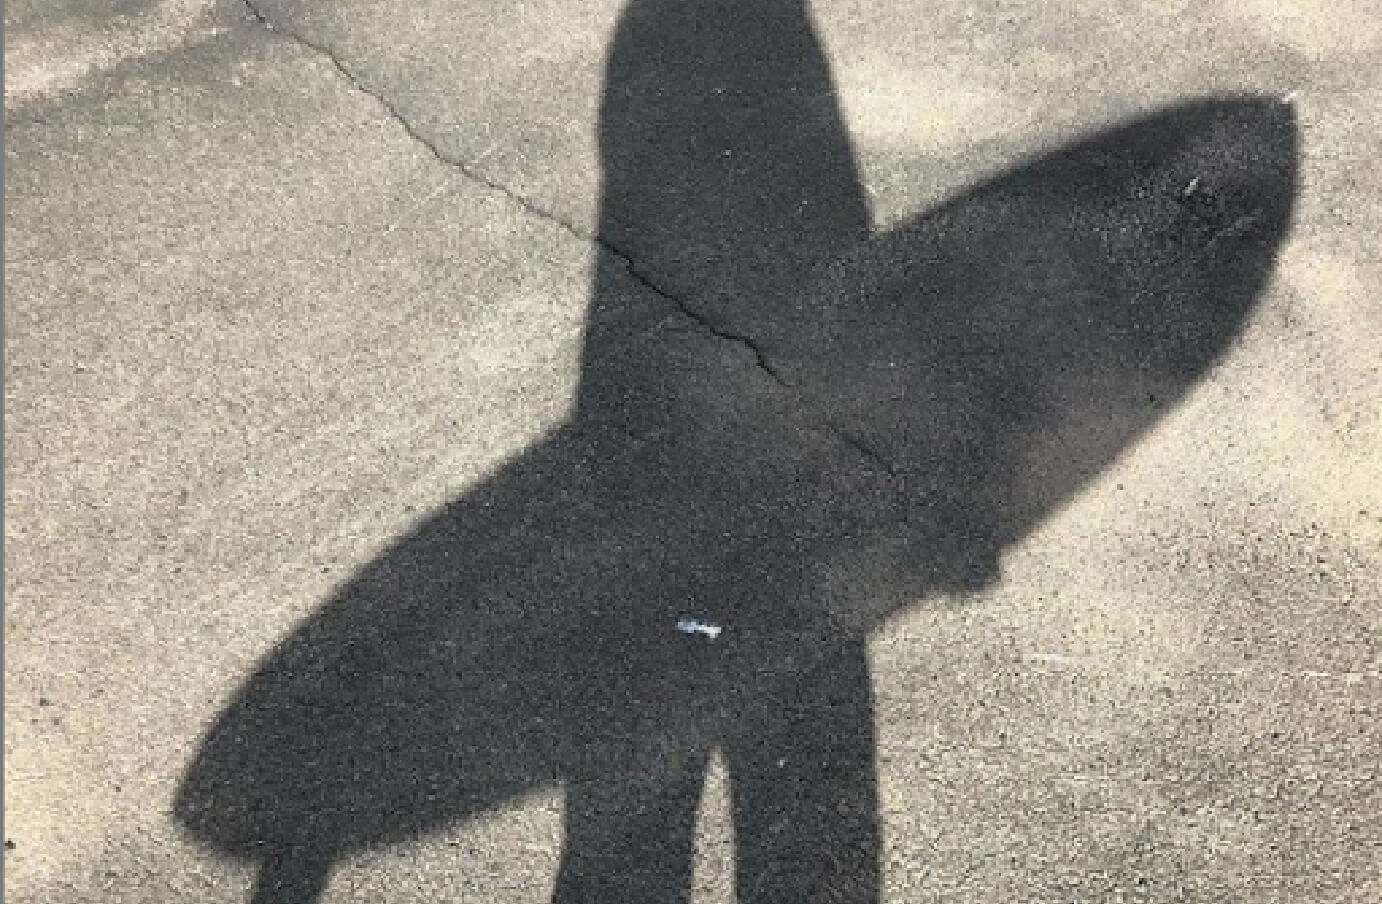 Shadow on some pavement of a silhouette of a man holding a surfboard